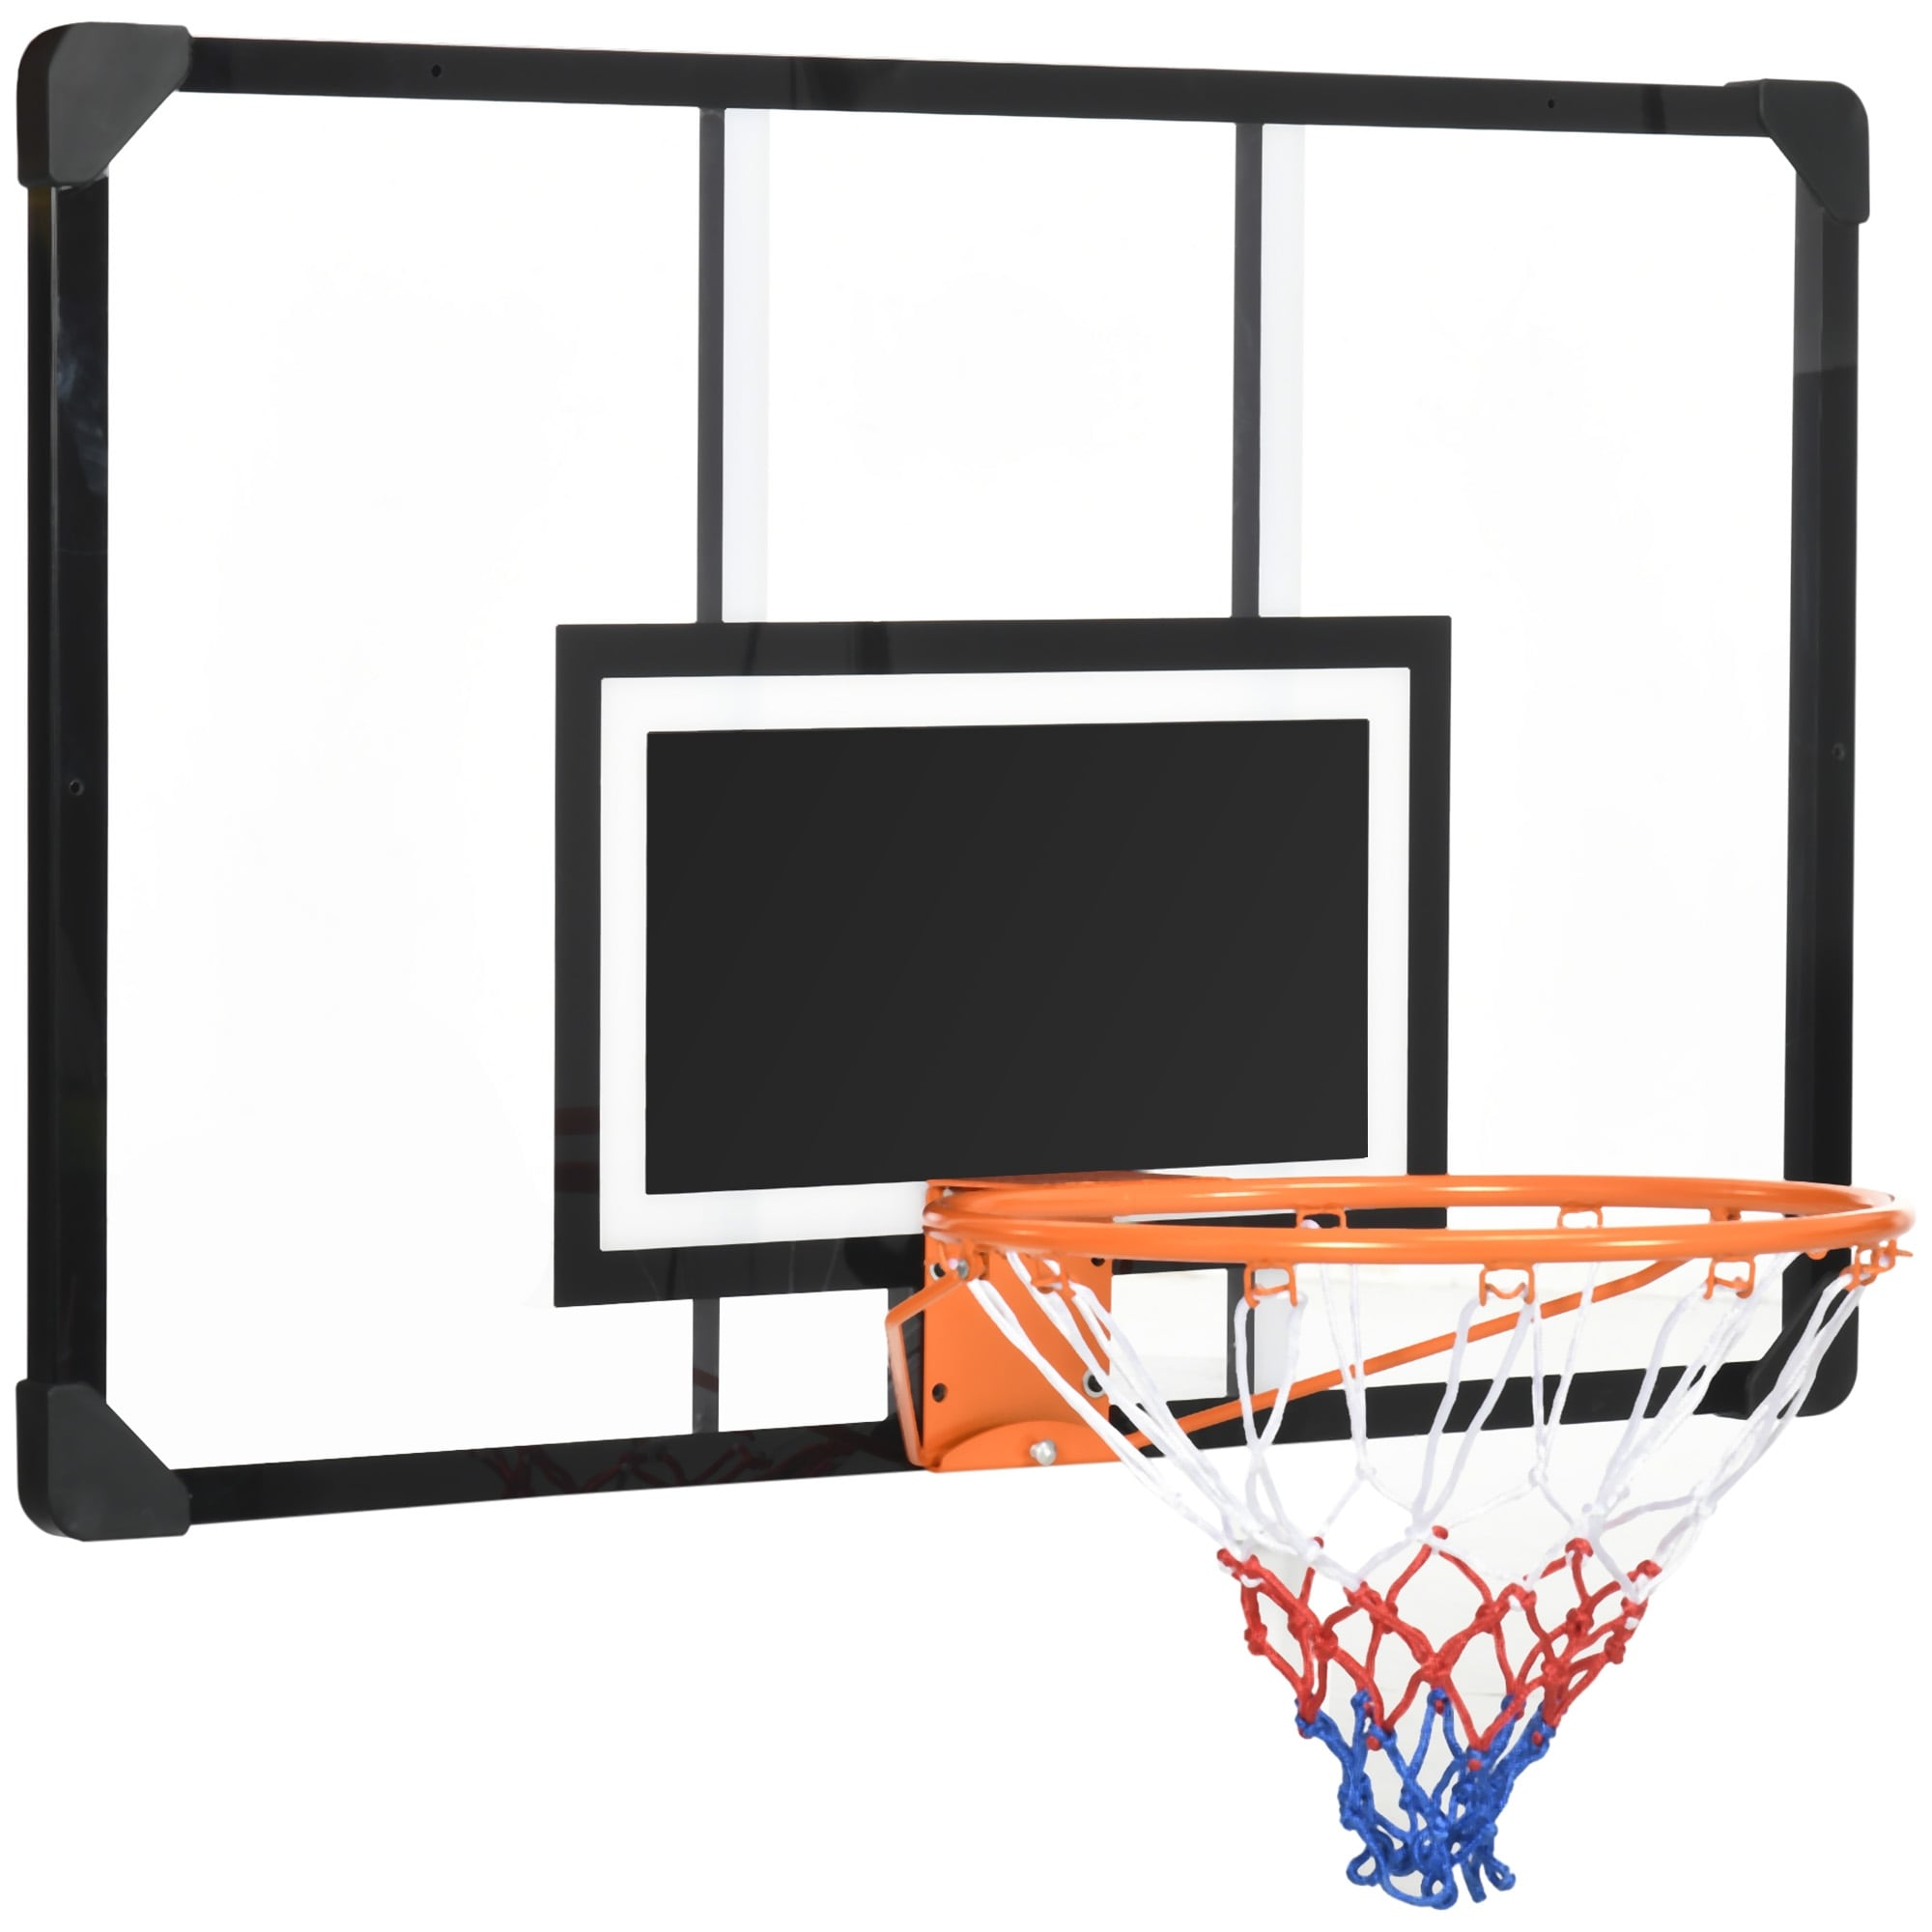 https://ak1.ostkcdn.com/images/products/is/images/direct/1f1e9e41acc95ff5d3c8de7bf4393c6d8fd8f5f9/Soozier-Wall-Mounted-Basketball-Hoop%2C-Mini-Hoop-with-45%27%27-x-29%27%27-Shatter-Proof-Backboard%2C-Durable-Rim-and-All-Weather-Net.jpg